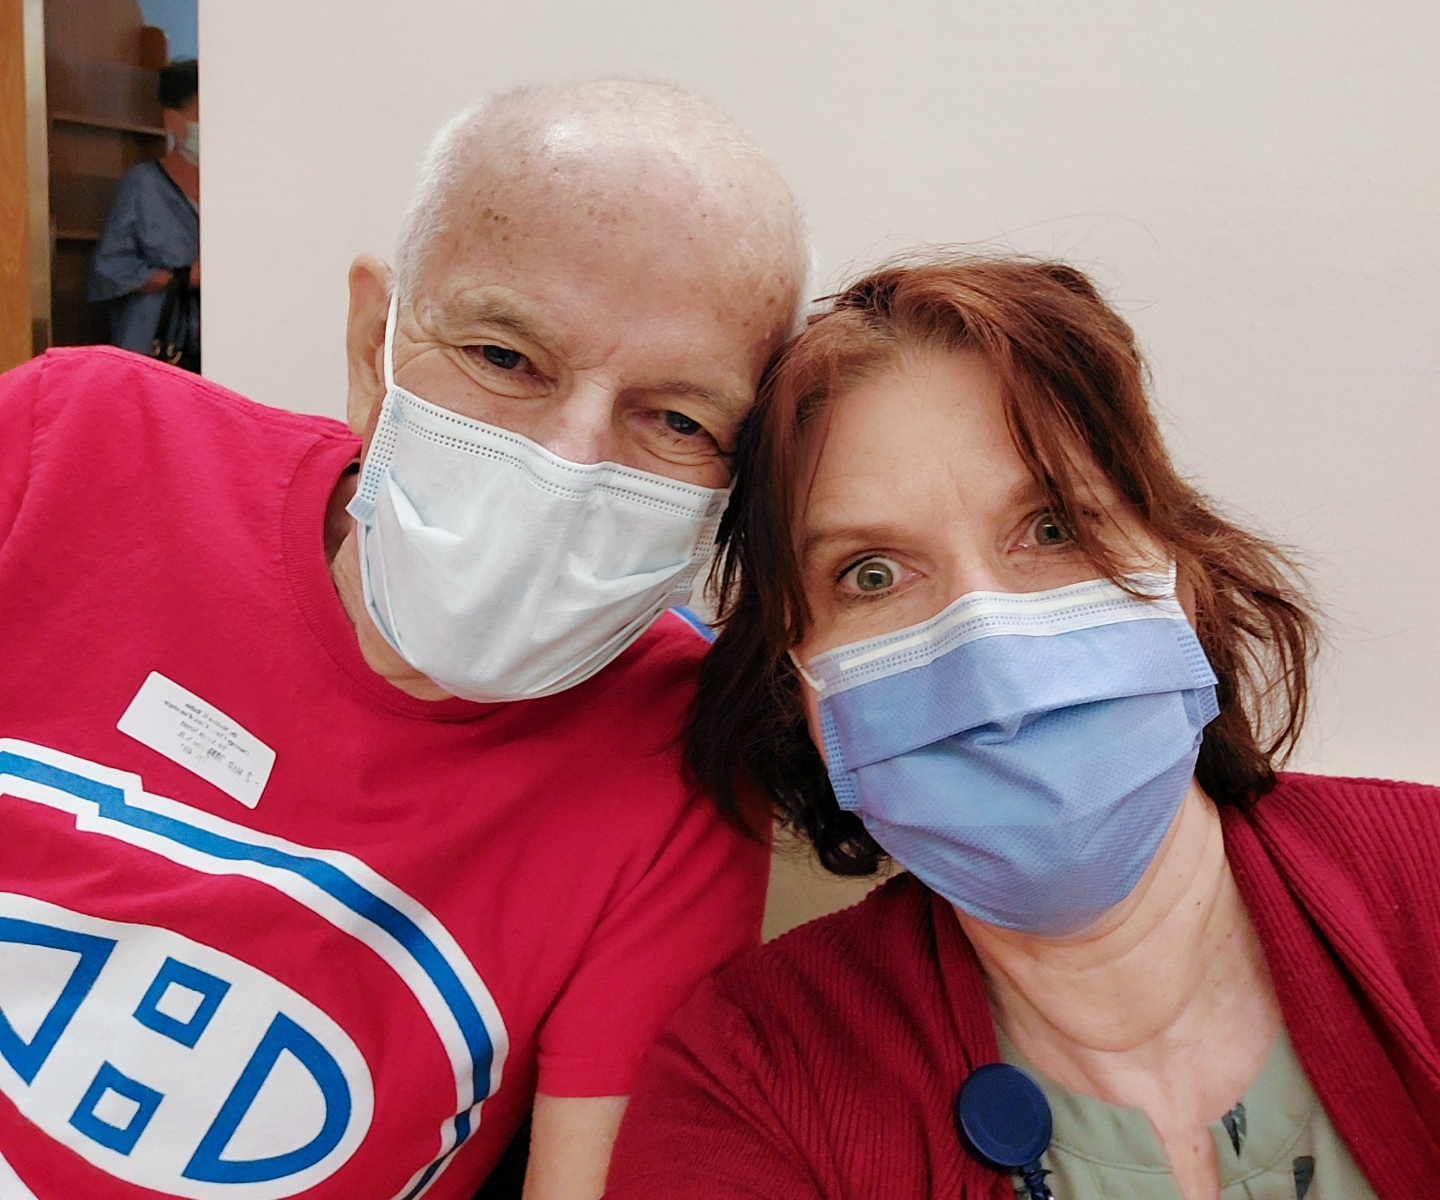 Woman with her dad wearing surgical masks